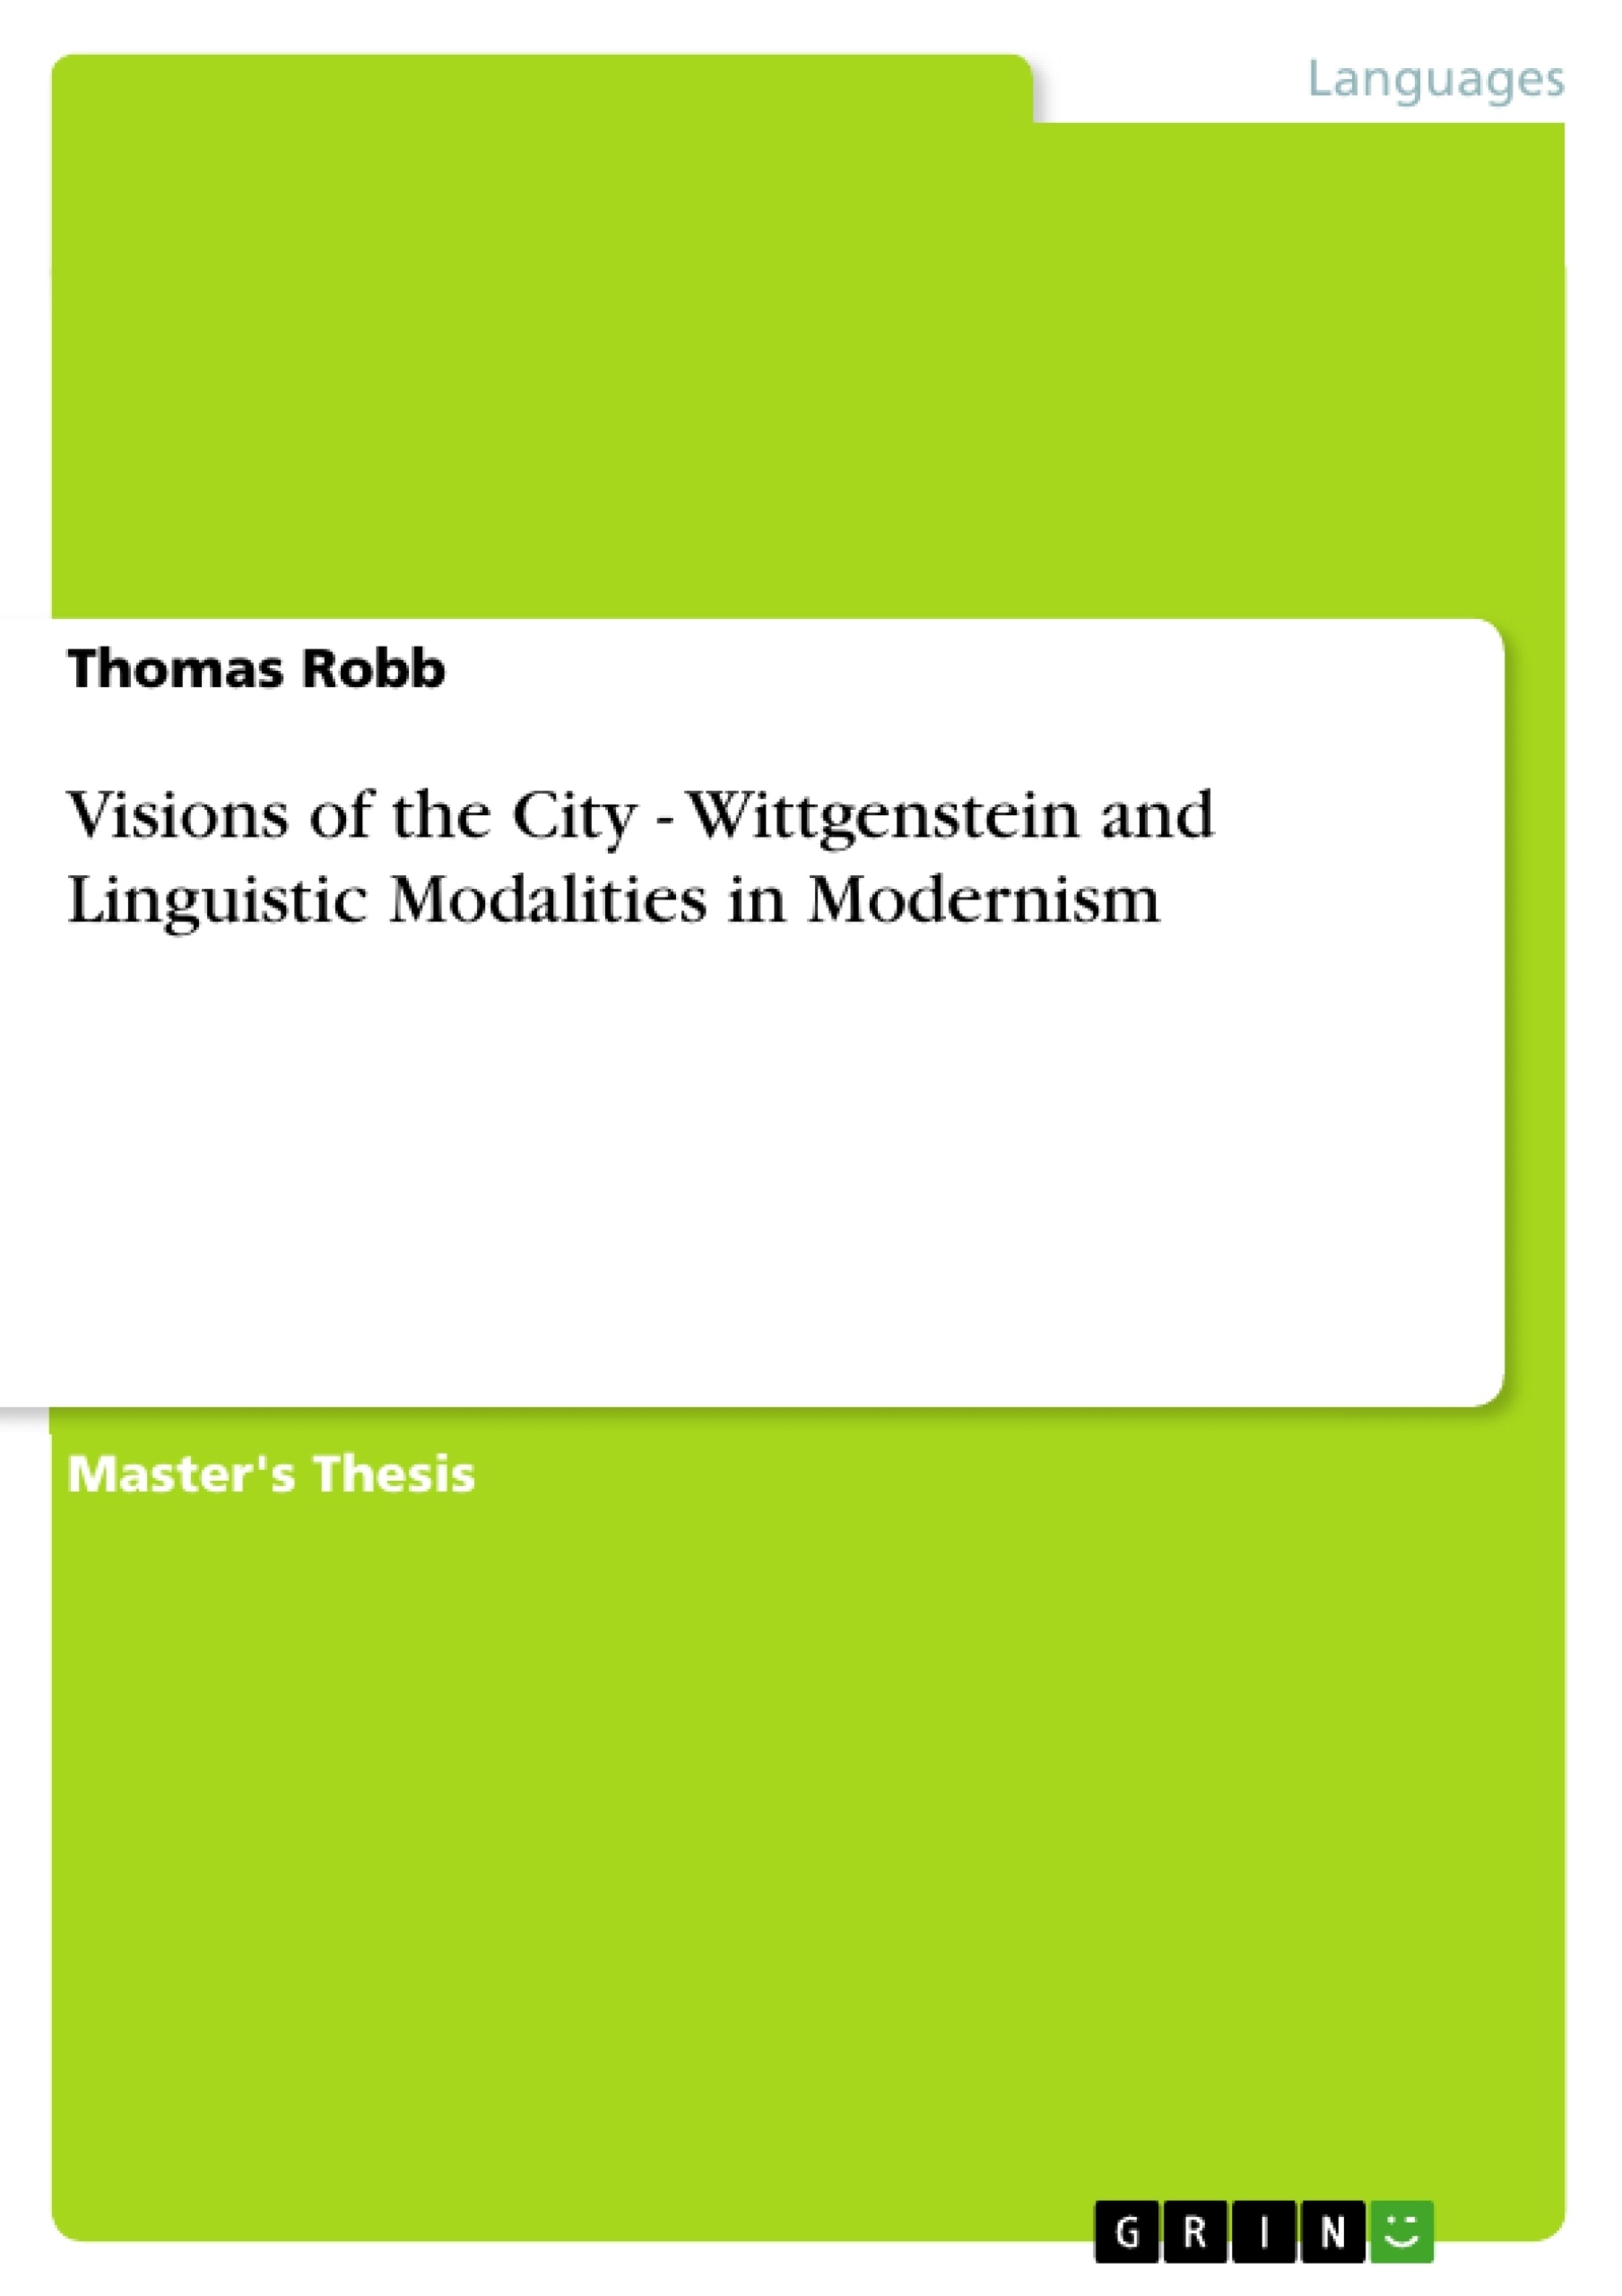 Title: Visions of the City - Wittgenstein and Linguistic Modalities in Modernism